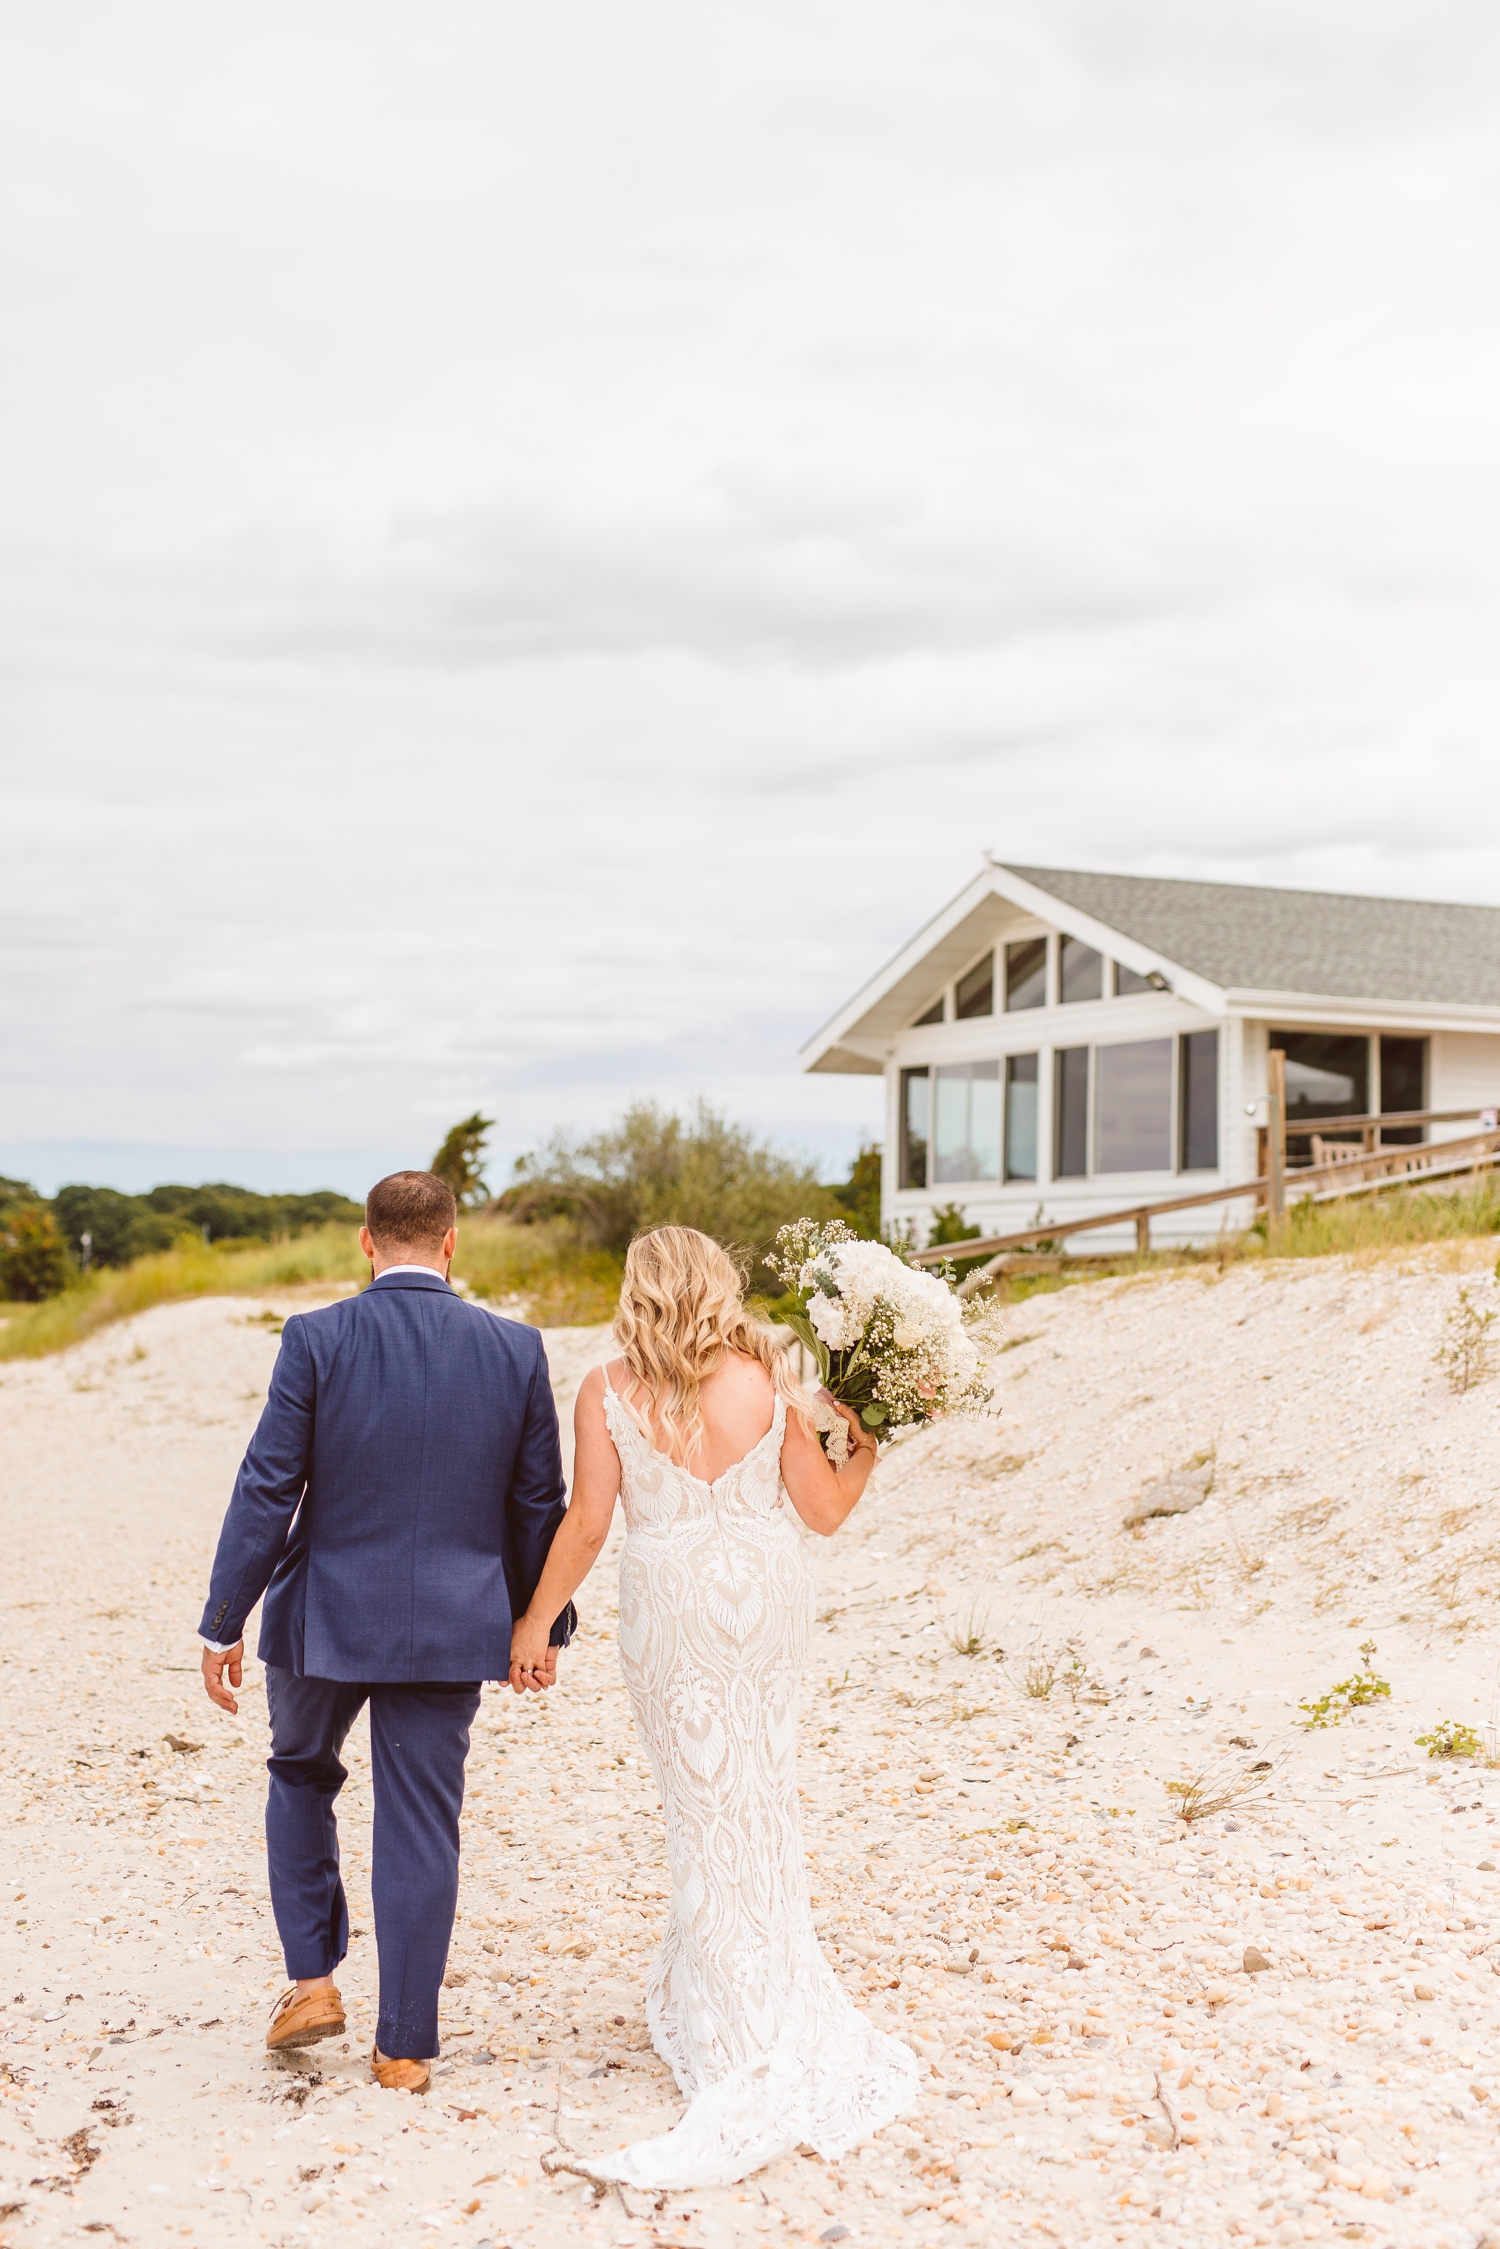 Bride and groom holding hands walking on beach | Brooke Michelle Photography